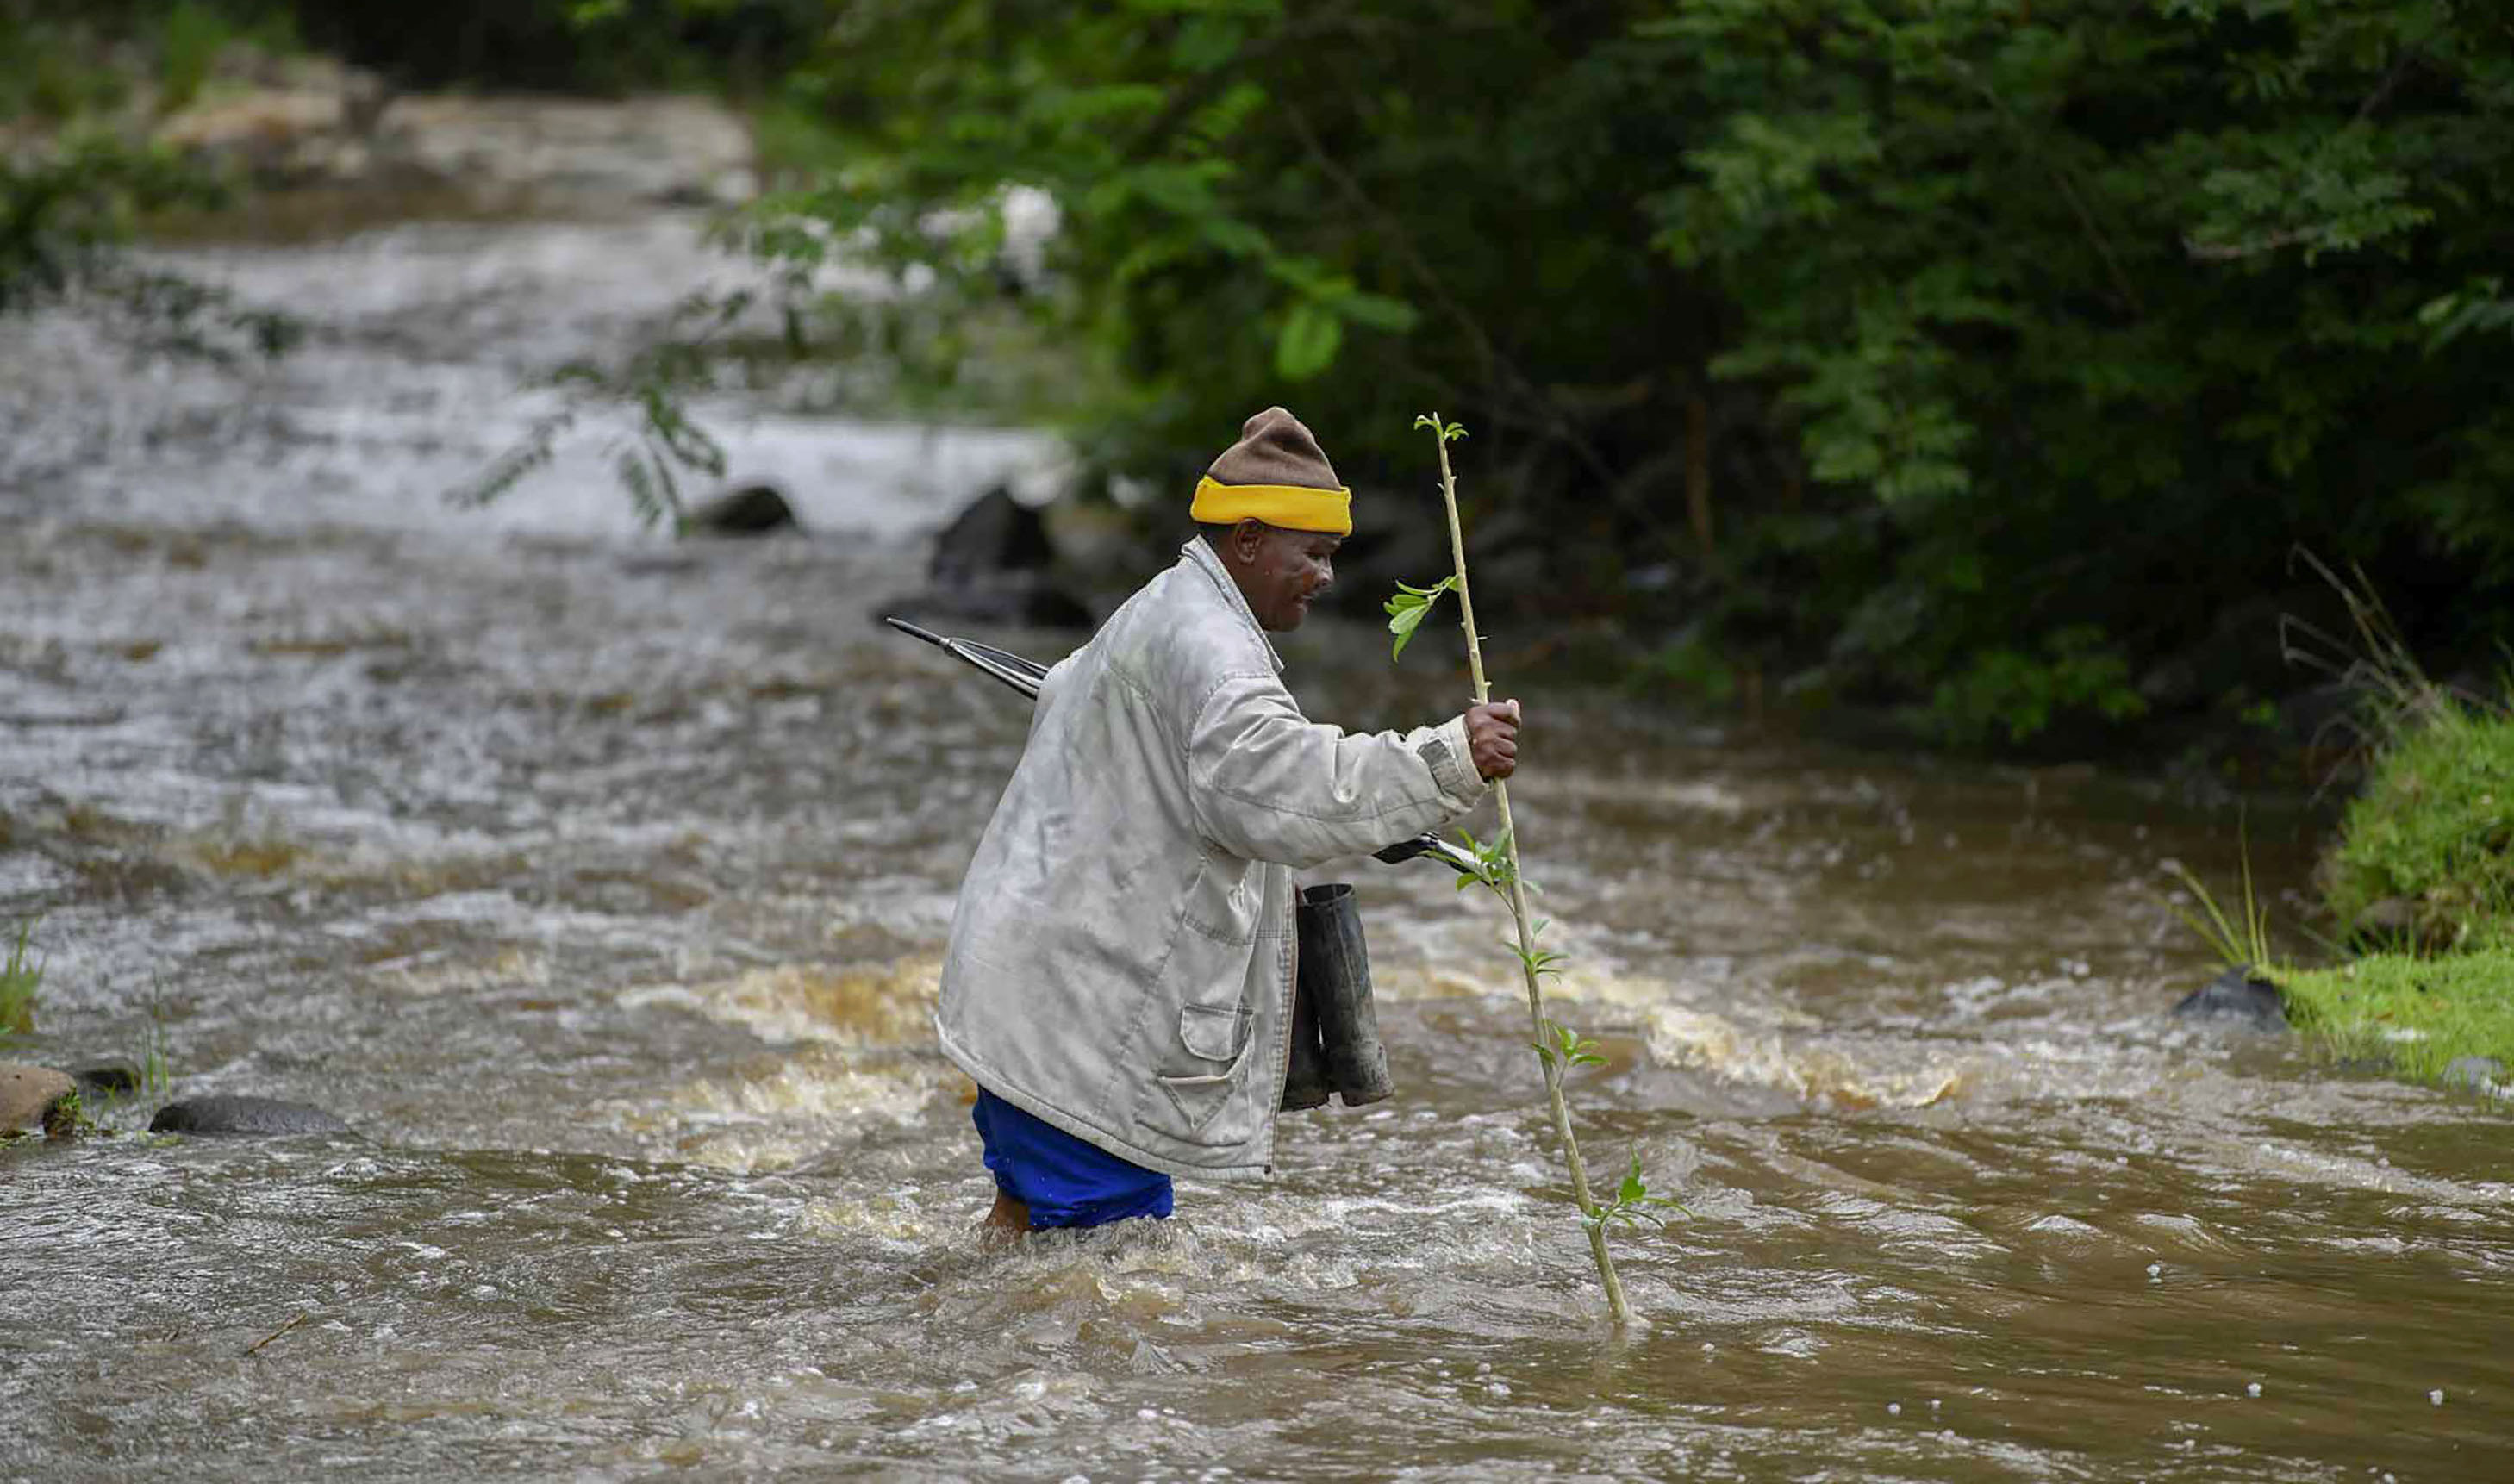 An image of a resident crossing a river in knee-deep water to reach a clinic